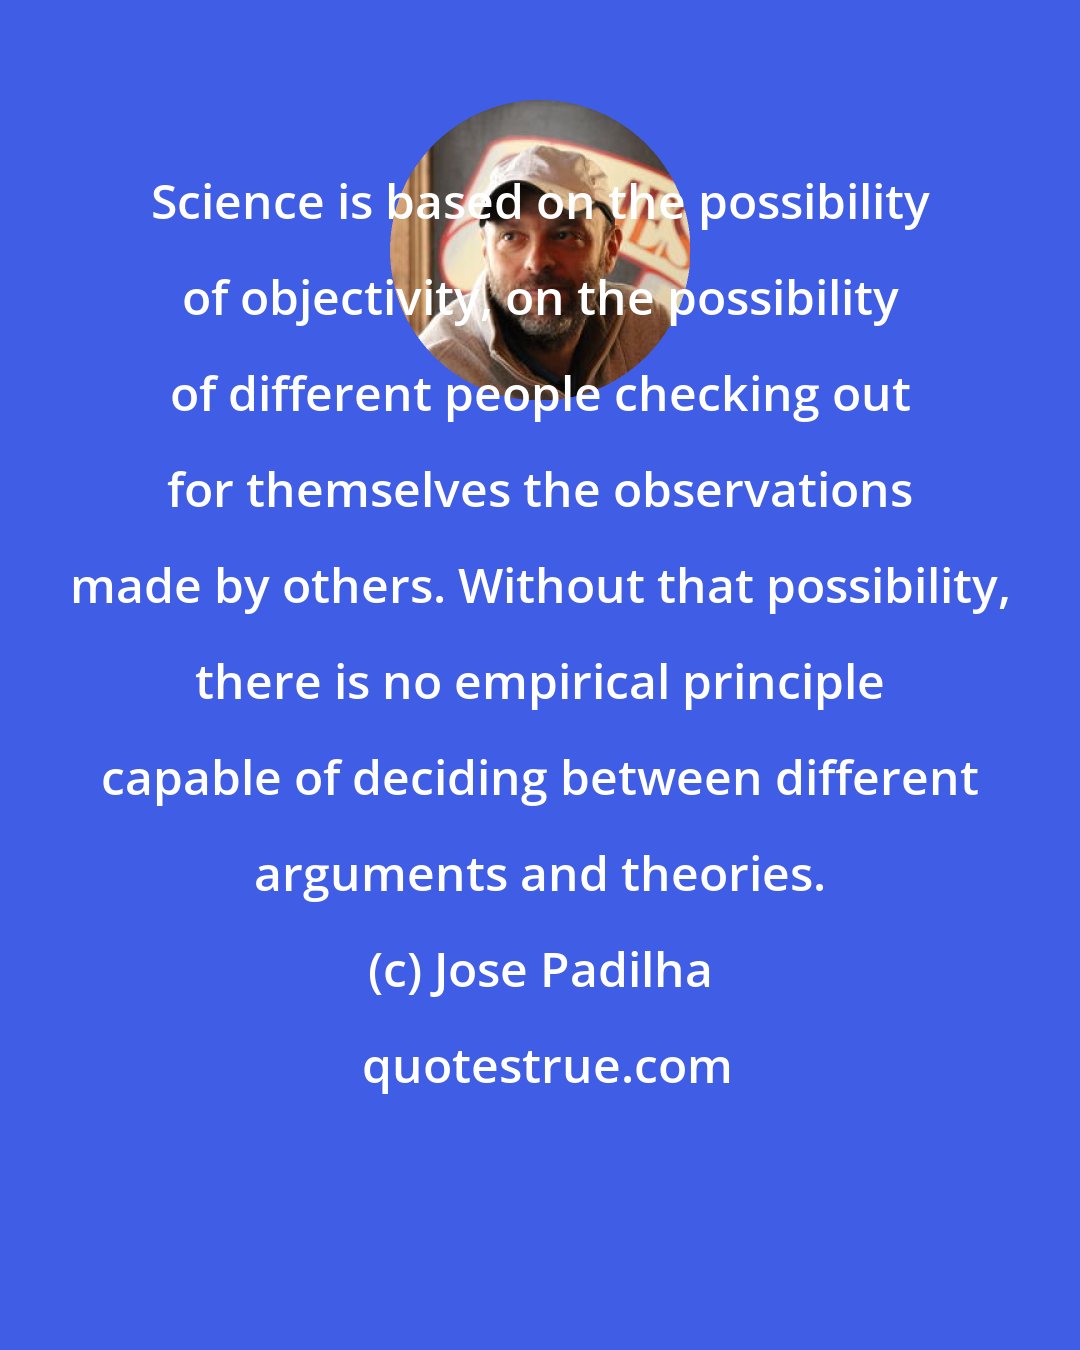 Jose Padilha: Science is based on the possibility of objectivity, on the possibility of different people checking out for themselves the observations made by others. Without that possibility, there is no empirical principle capable of deciding between different arguments and theories.